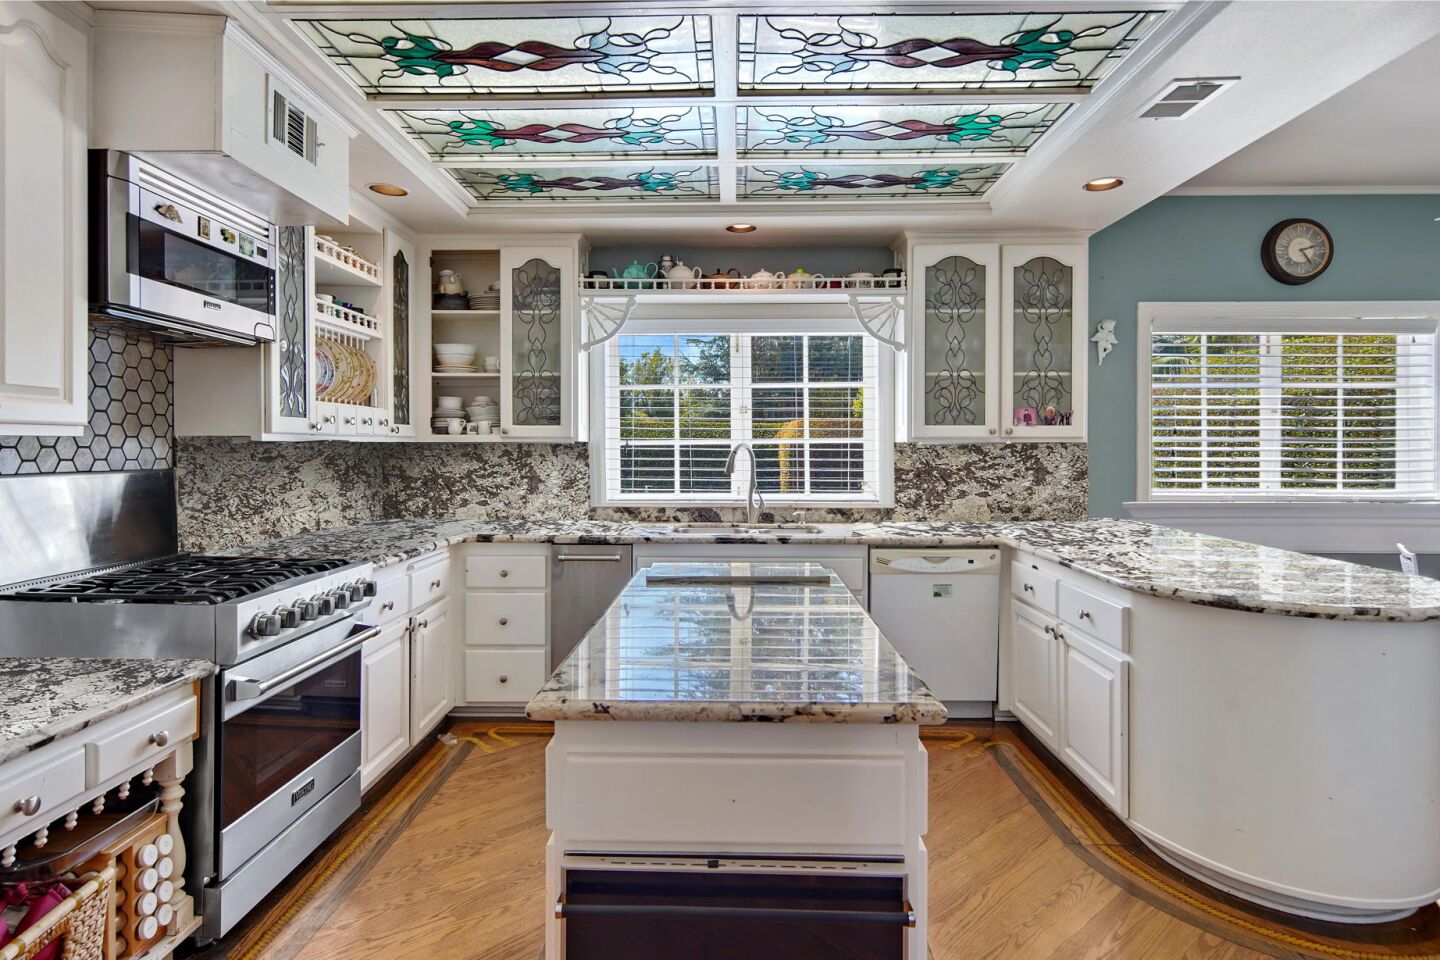 The kitchen has white cabinets and an island and wooden floor.